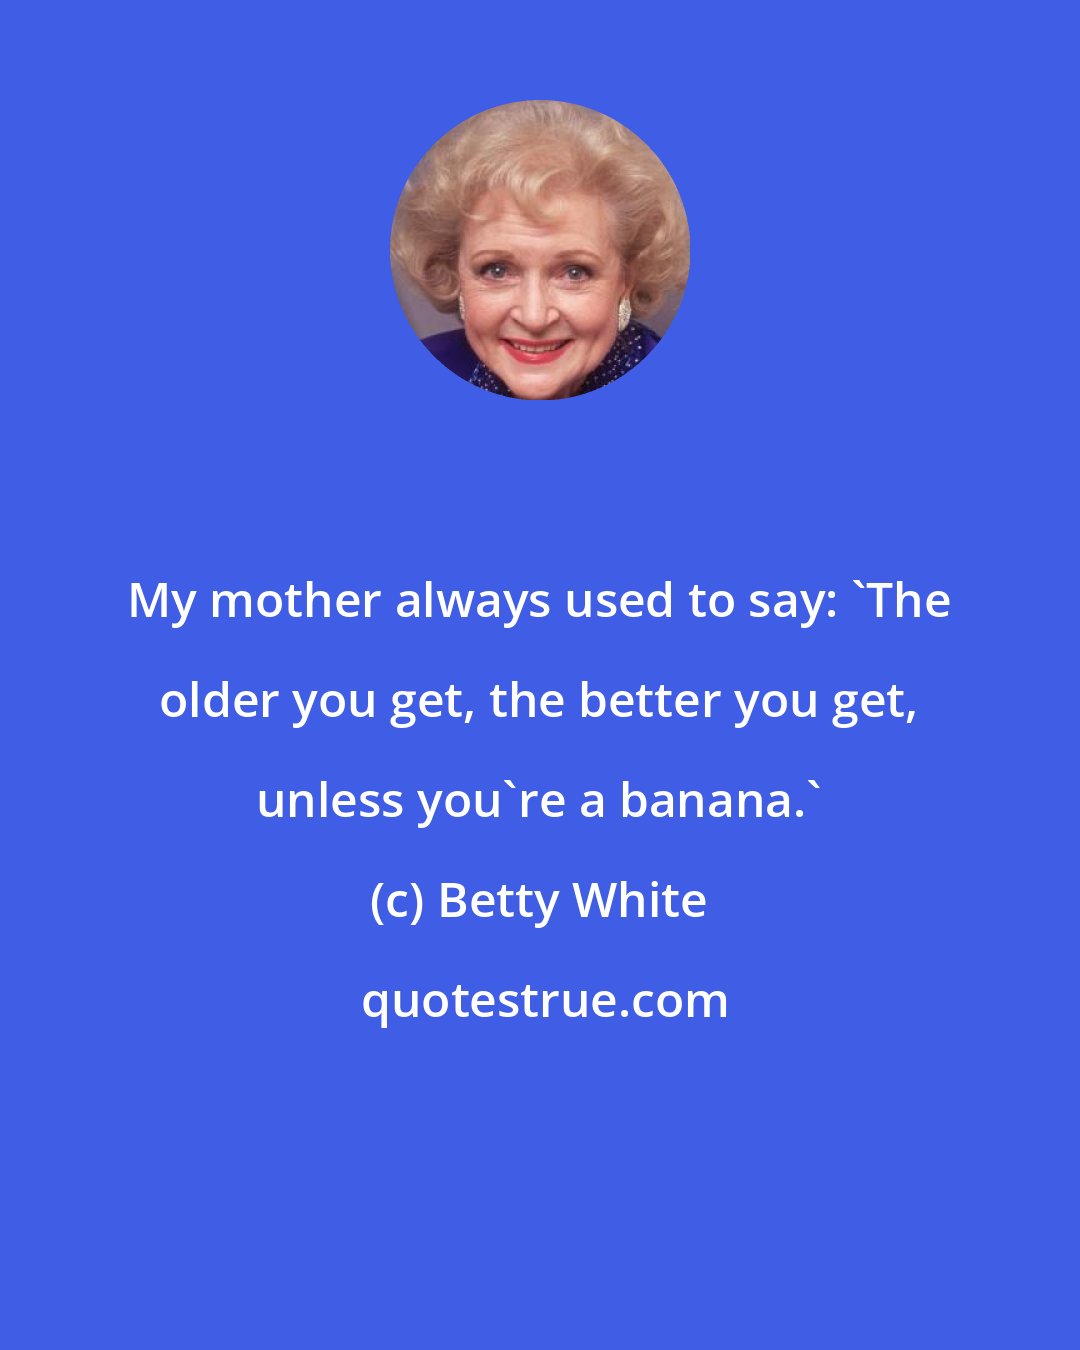 Betty White: My mother always used to say: 'The older you get, the better you get, unless you're a banana.'